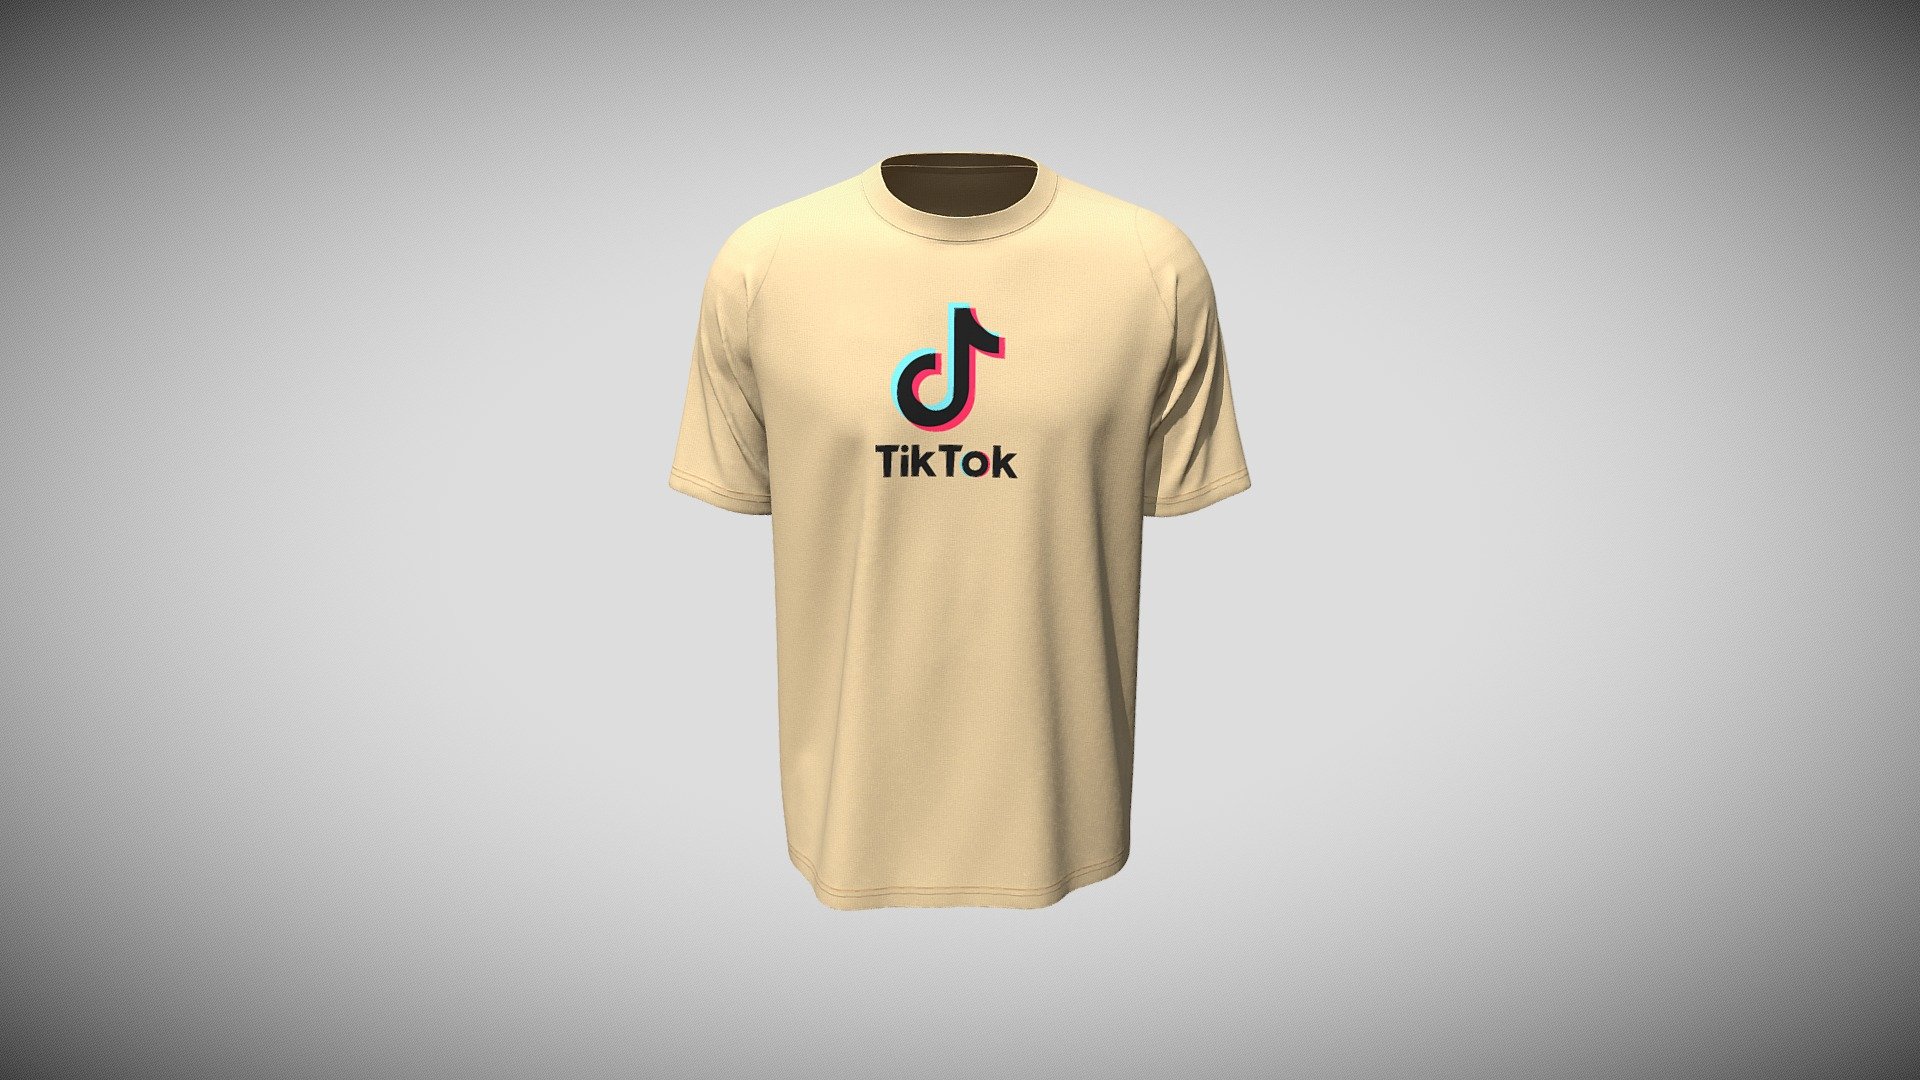 Cloth Title = Sporty T- Shirt TikTok 

SKU = DG100017 

Category = Men 

Product Type = T-Shirt 

Cloth Length = Regular 

Body Fit = Relaxed Fit 

Occasion = Casual  


Our Services:

3D Apparel Design.

OBJ,FBX,GLTF Making with High/Low Poly.

Fabric Digitalization.

Mockup making.

3D Teck Pack.

Pattern Making.

2D Illustration.

Cloth Animation and 360 Spin Video.


Contact us:- 

Email: info@digitalfashionwear.com 

Website: https://digitalfashionwear.com 

WhatsApp No: +8801759350445 


We designed all the types of cloth specially focused on product visualization, e-commerce, fitting, and production. 

We will design: 

T-shirts 

Polo shirts 

Hoodies 

Sweatshirt 

Jackets 

Shirts 

TankTops 

Trousers 

Bras 

Underwear 

Blazer 

Aprons 

Leggings 

and All Fashion items. 





Our goal is to make sure what we provide you, meets your demand 3d model